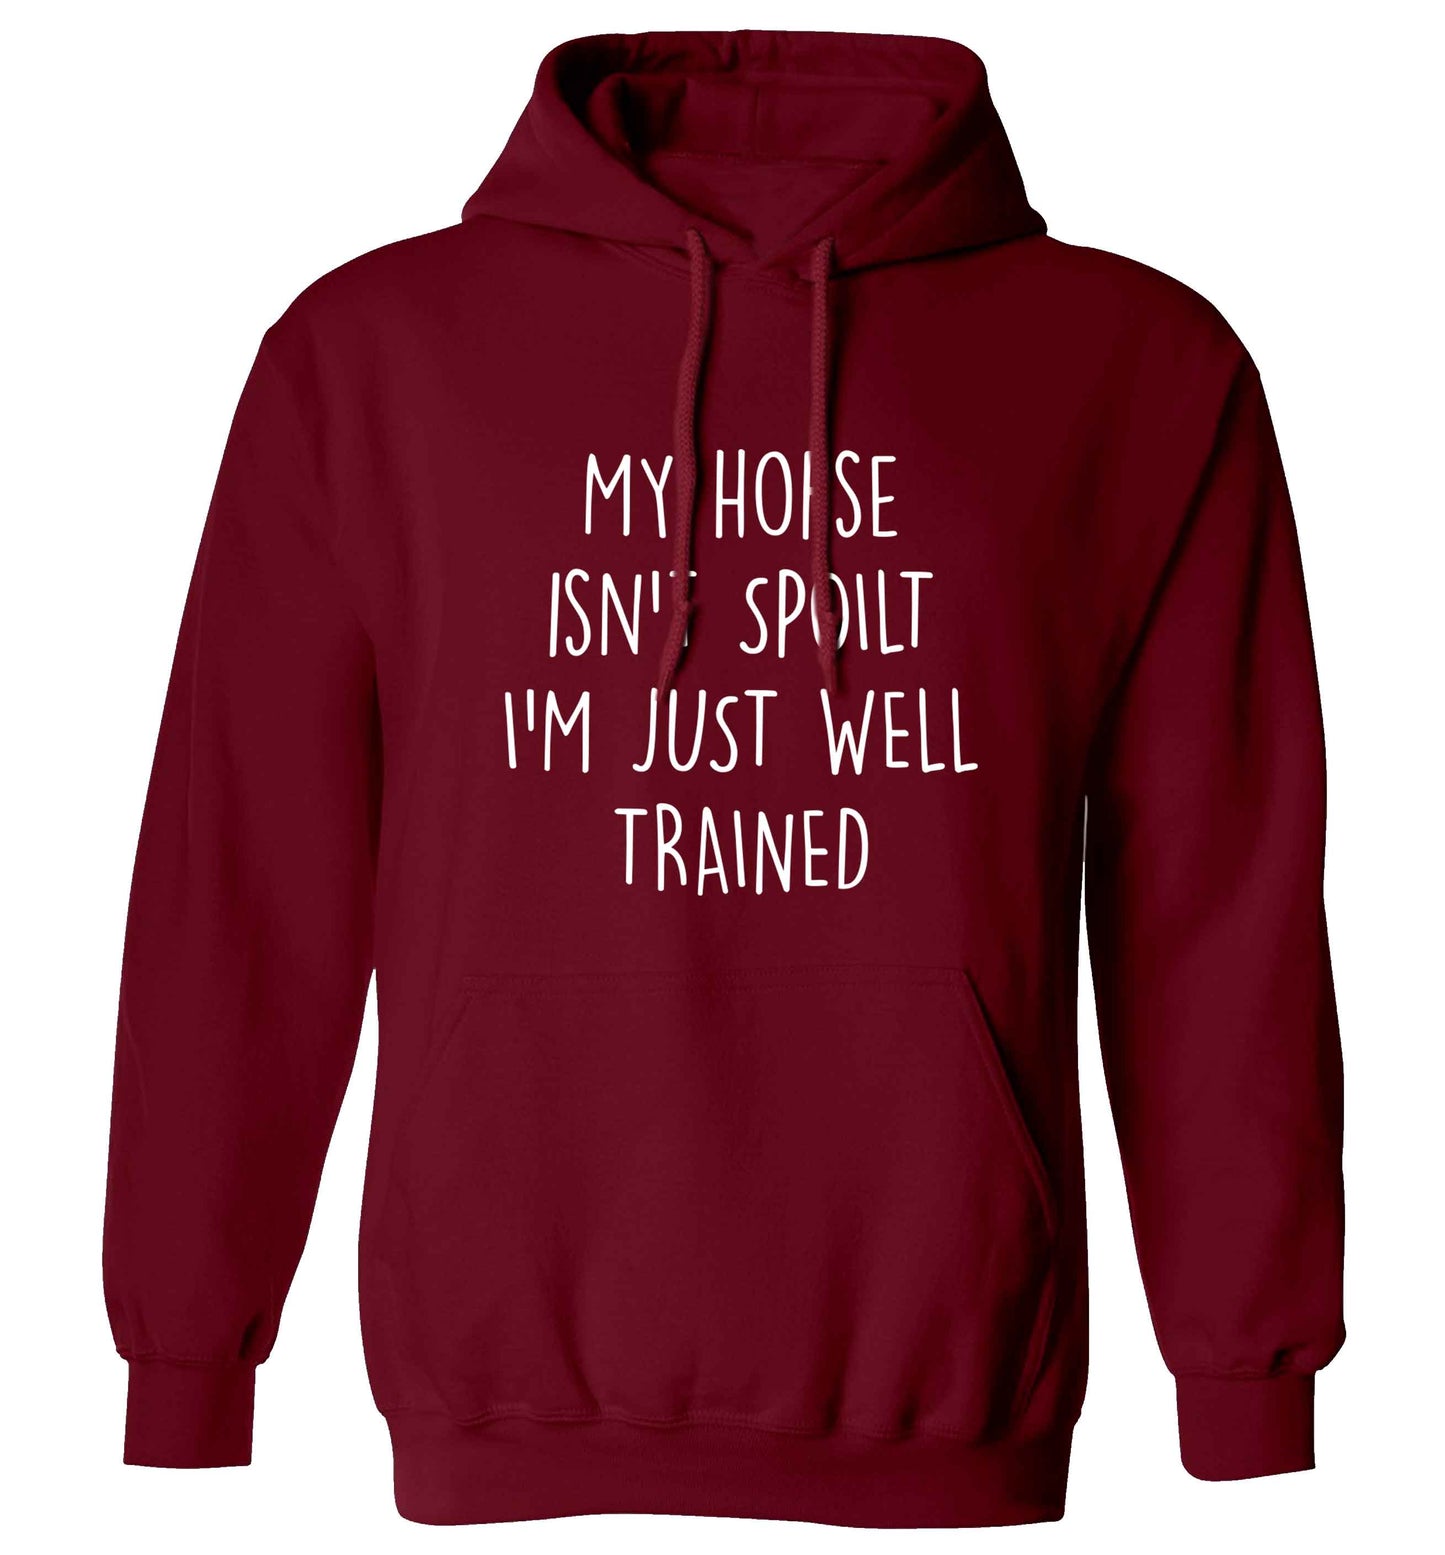 My horse isn't spoilt I'm just well trained adults unisex maroon hoodie 2XL